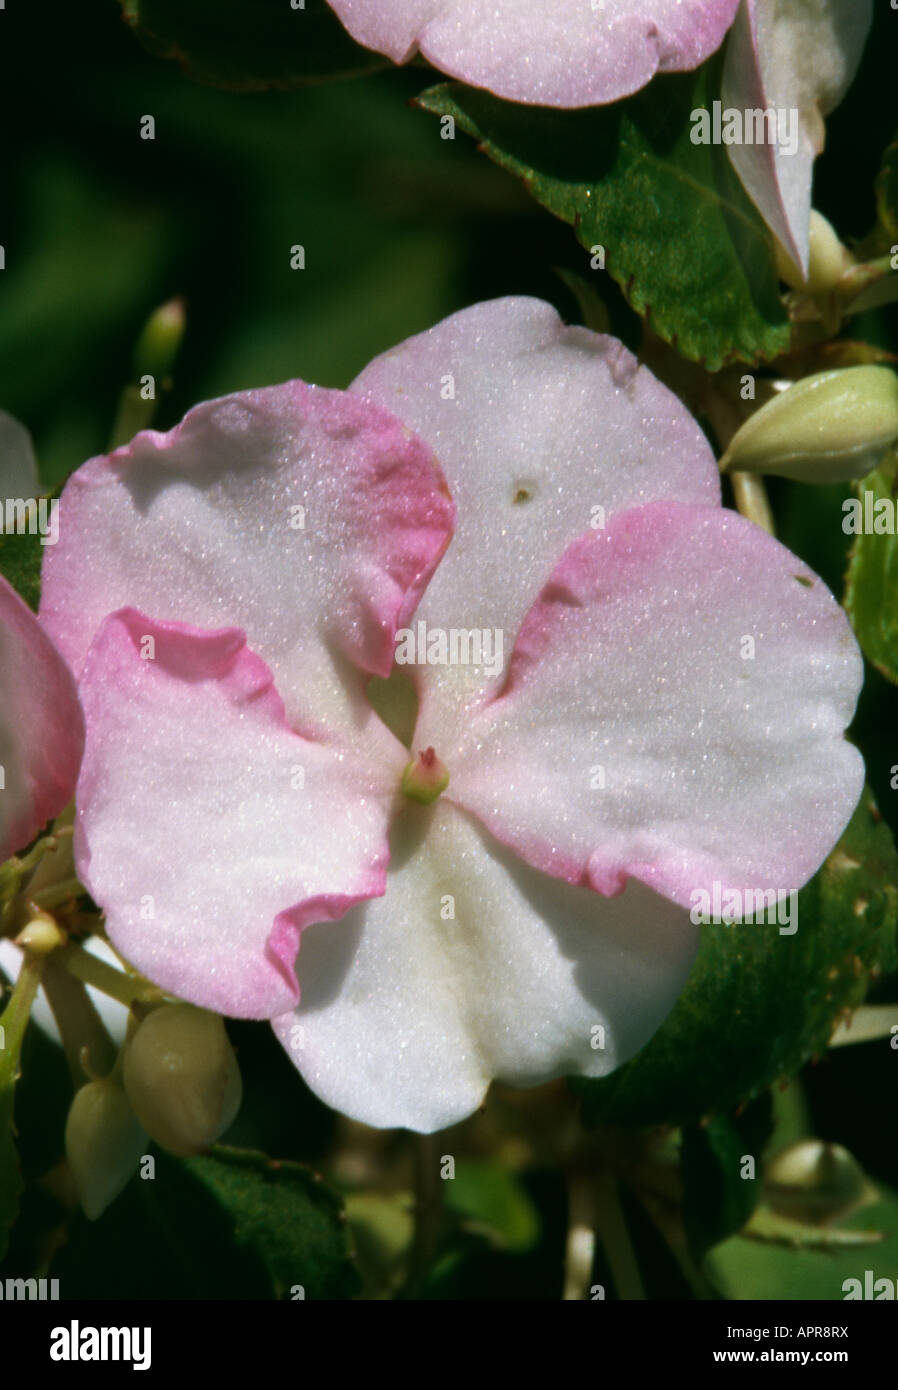 Impatiens Walleriana pale pink timid subtle Stock Photo